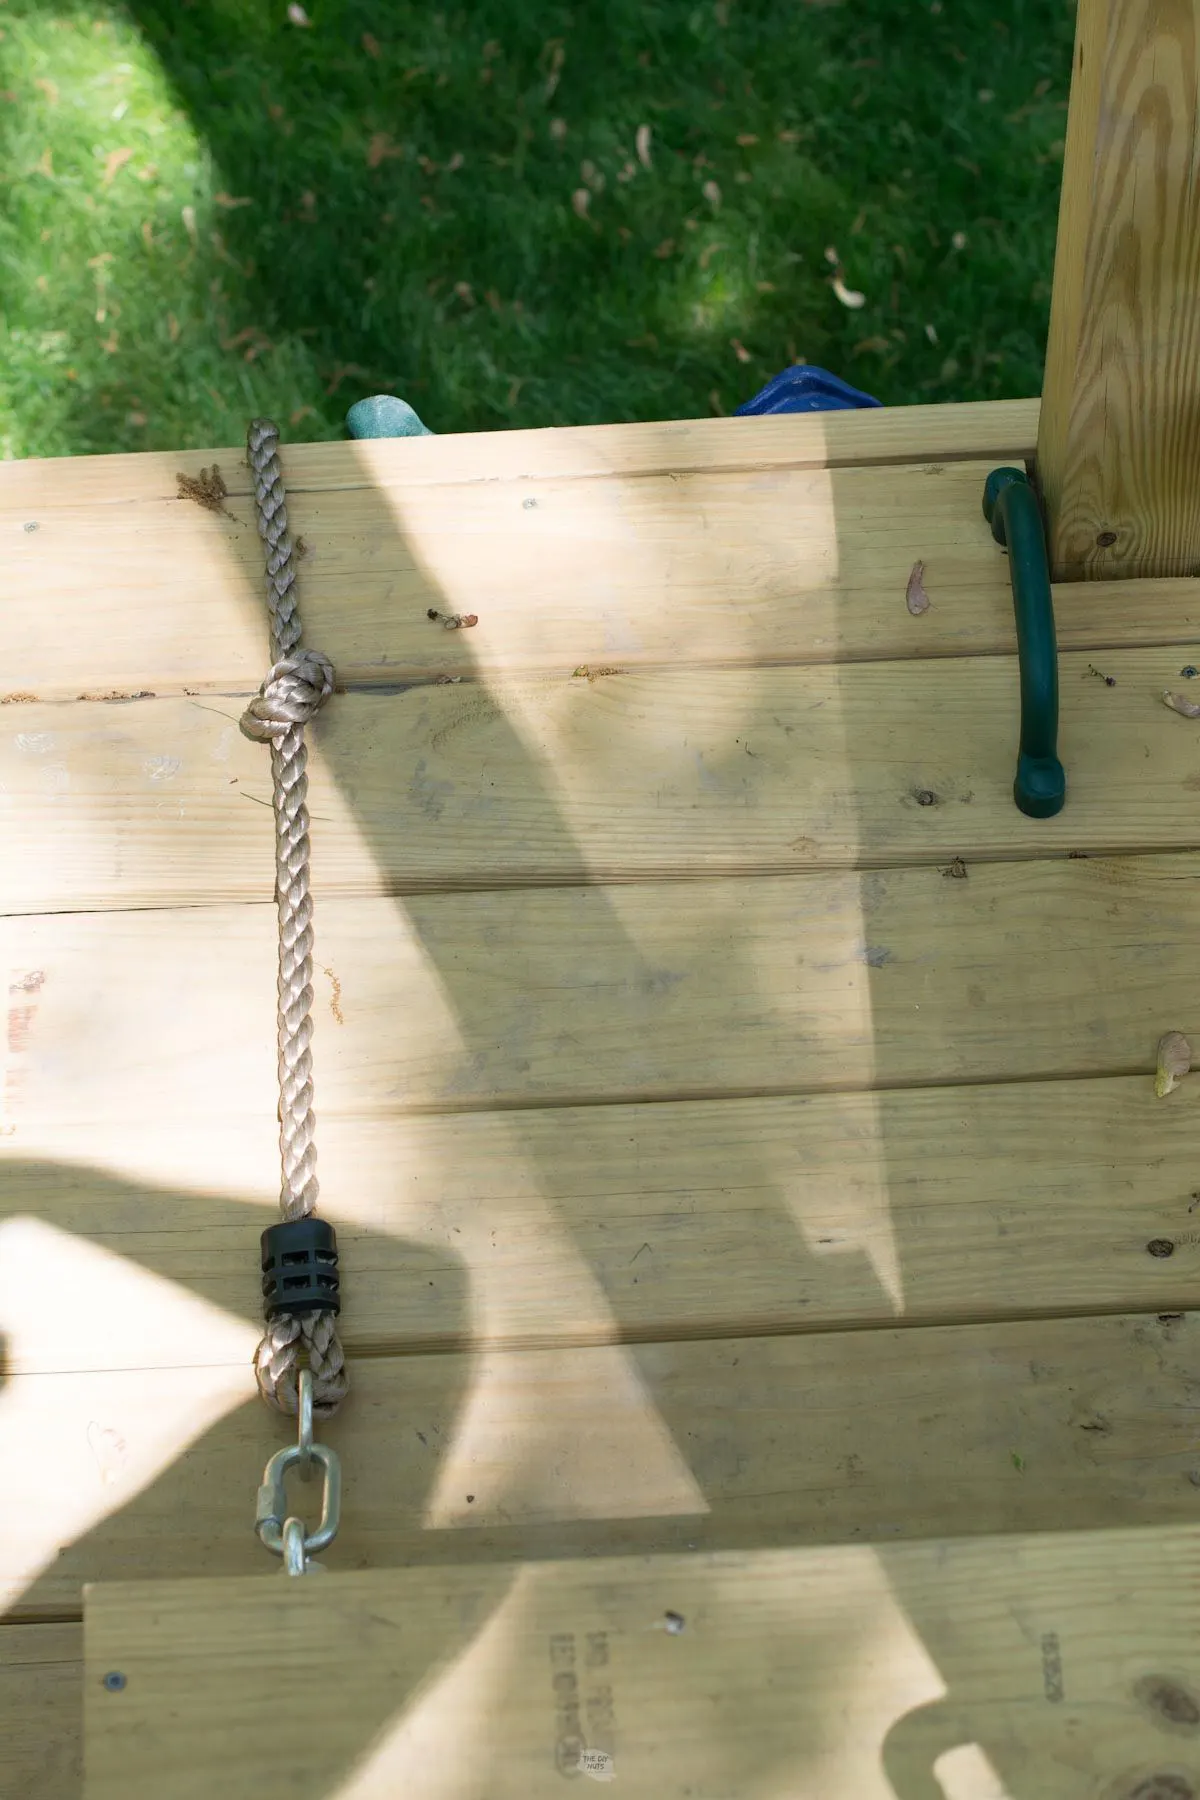 decking boards on platform of diy playground with handle and rope attached.